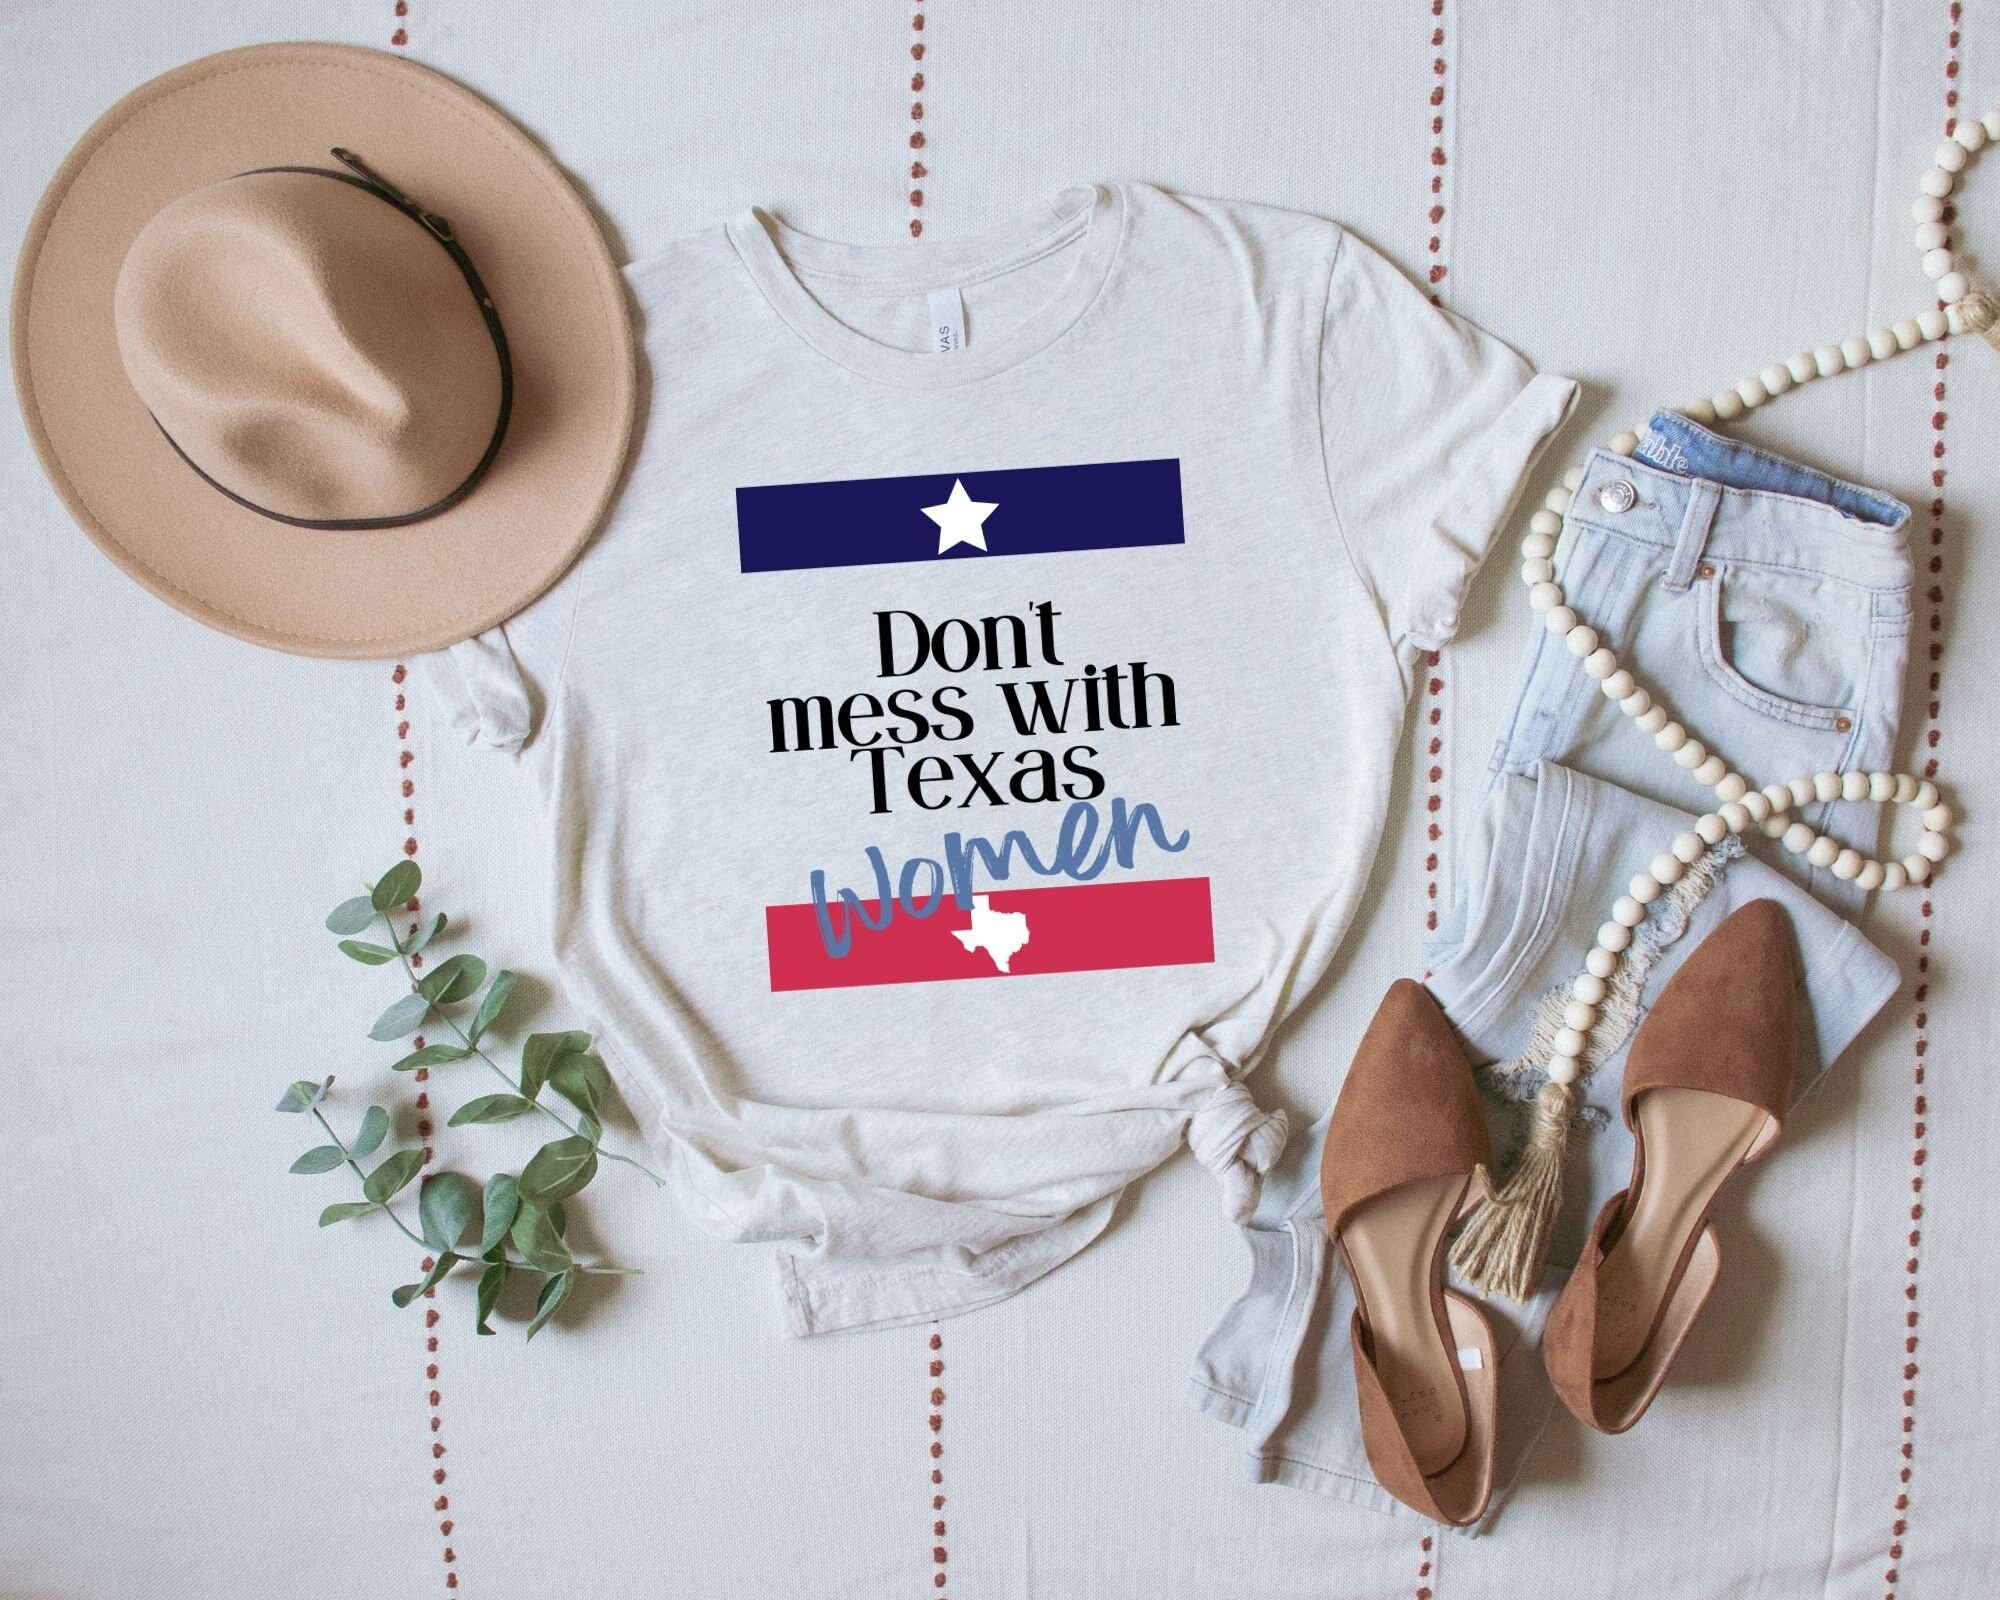 Discover Don't Mess With Texas Women, Shirt for Women, Election 2022 Shirt, Texas Election